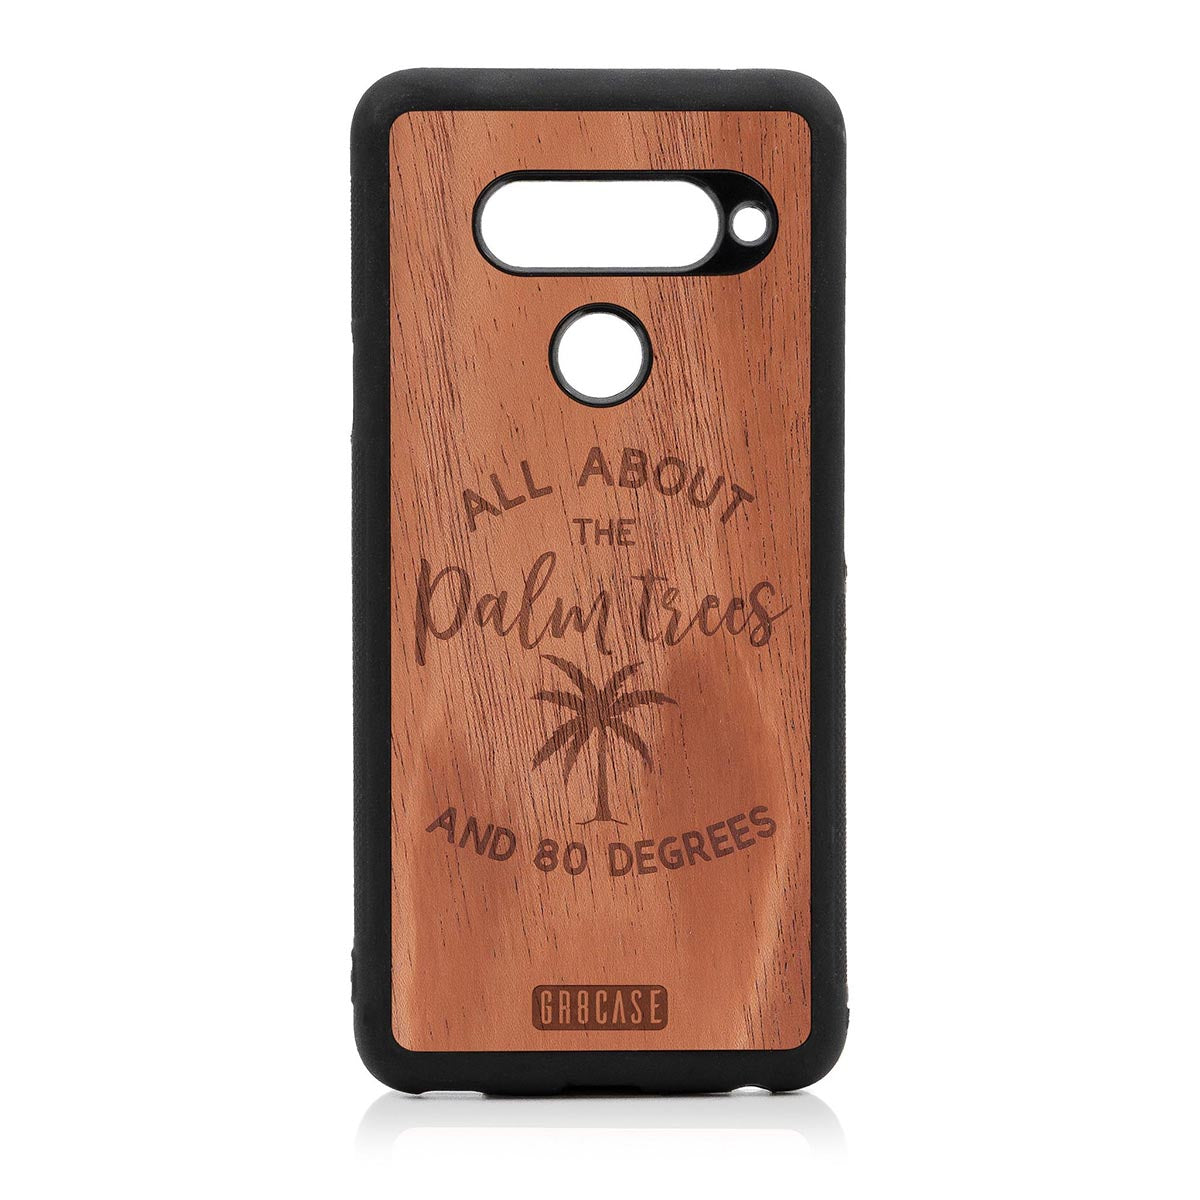 All About The Palm Trees and 80 Degrees Design Wood Case For LG V40 ThinQ by GR8CASE